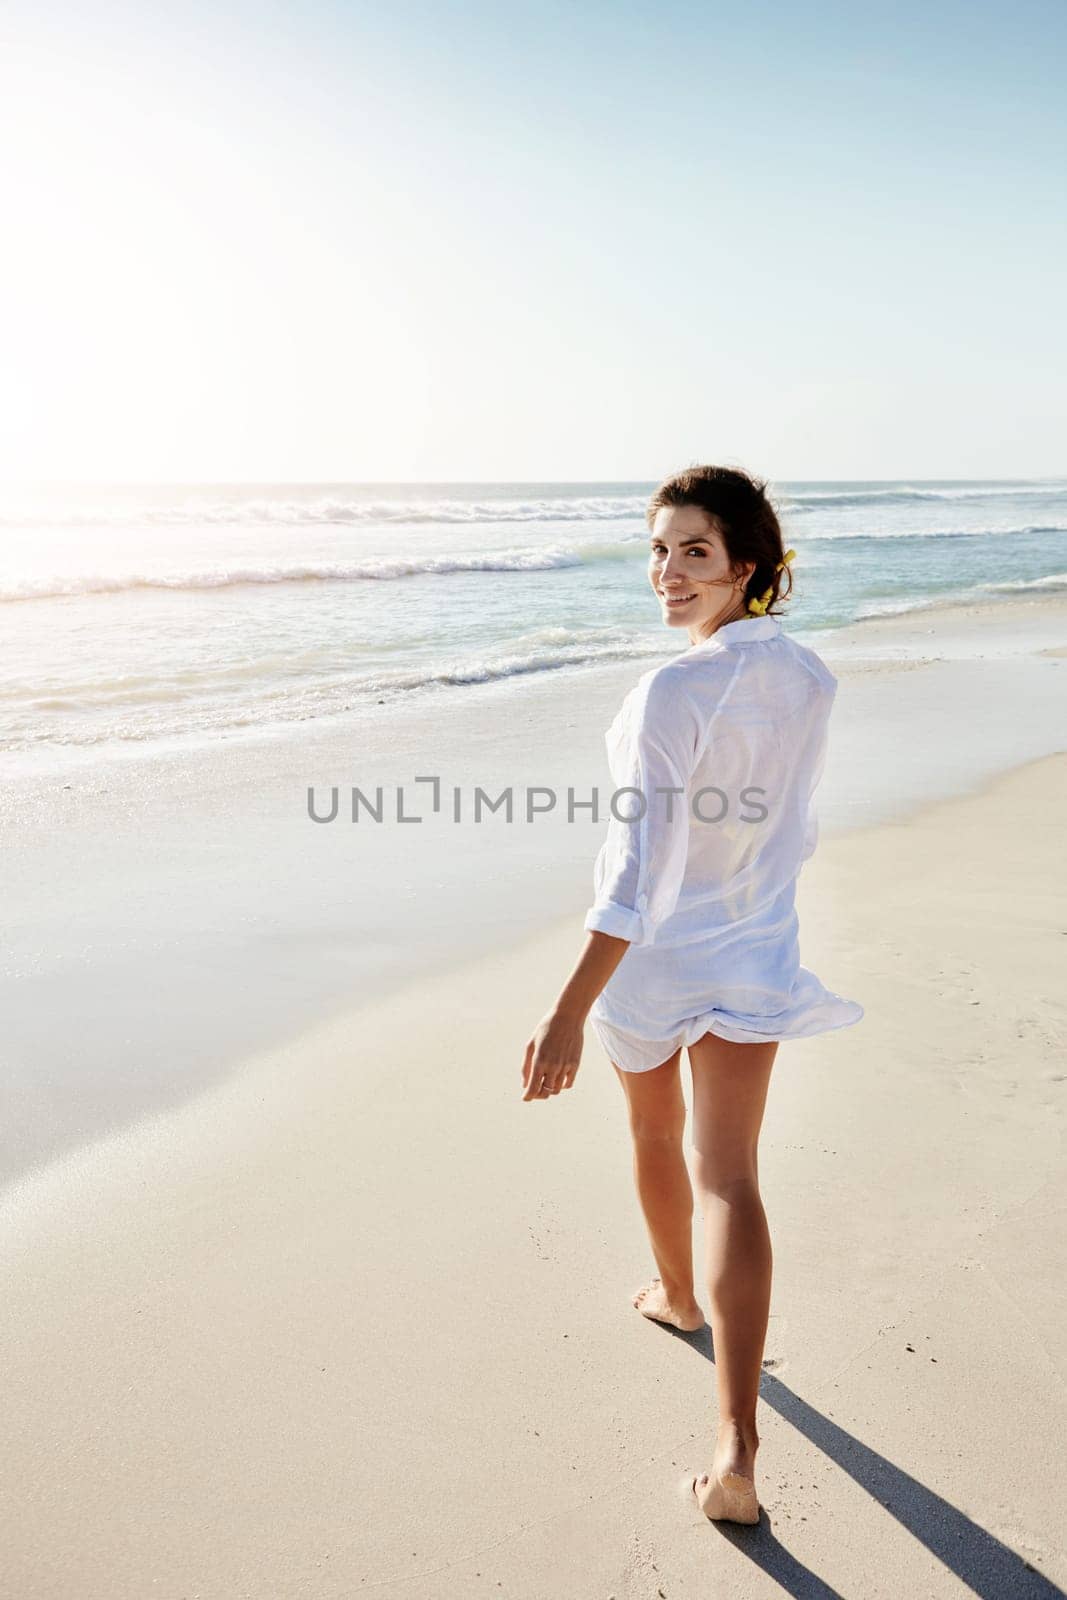 Romance me with walks on the beach. a beautiful young woman enjoying her day at the beach